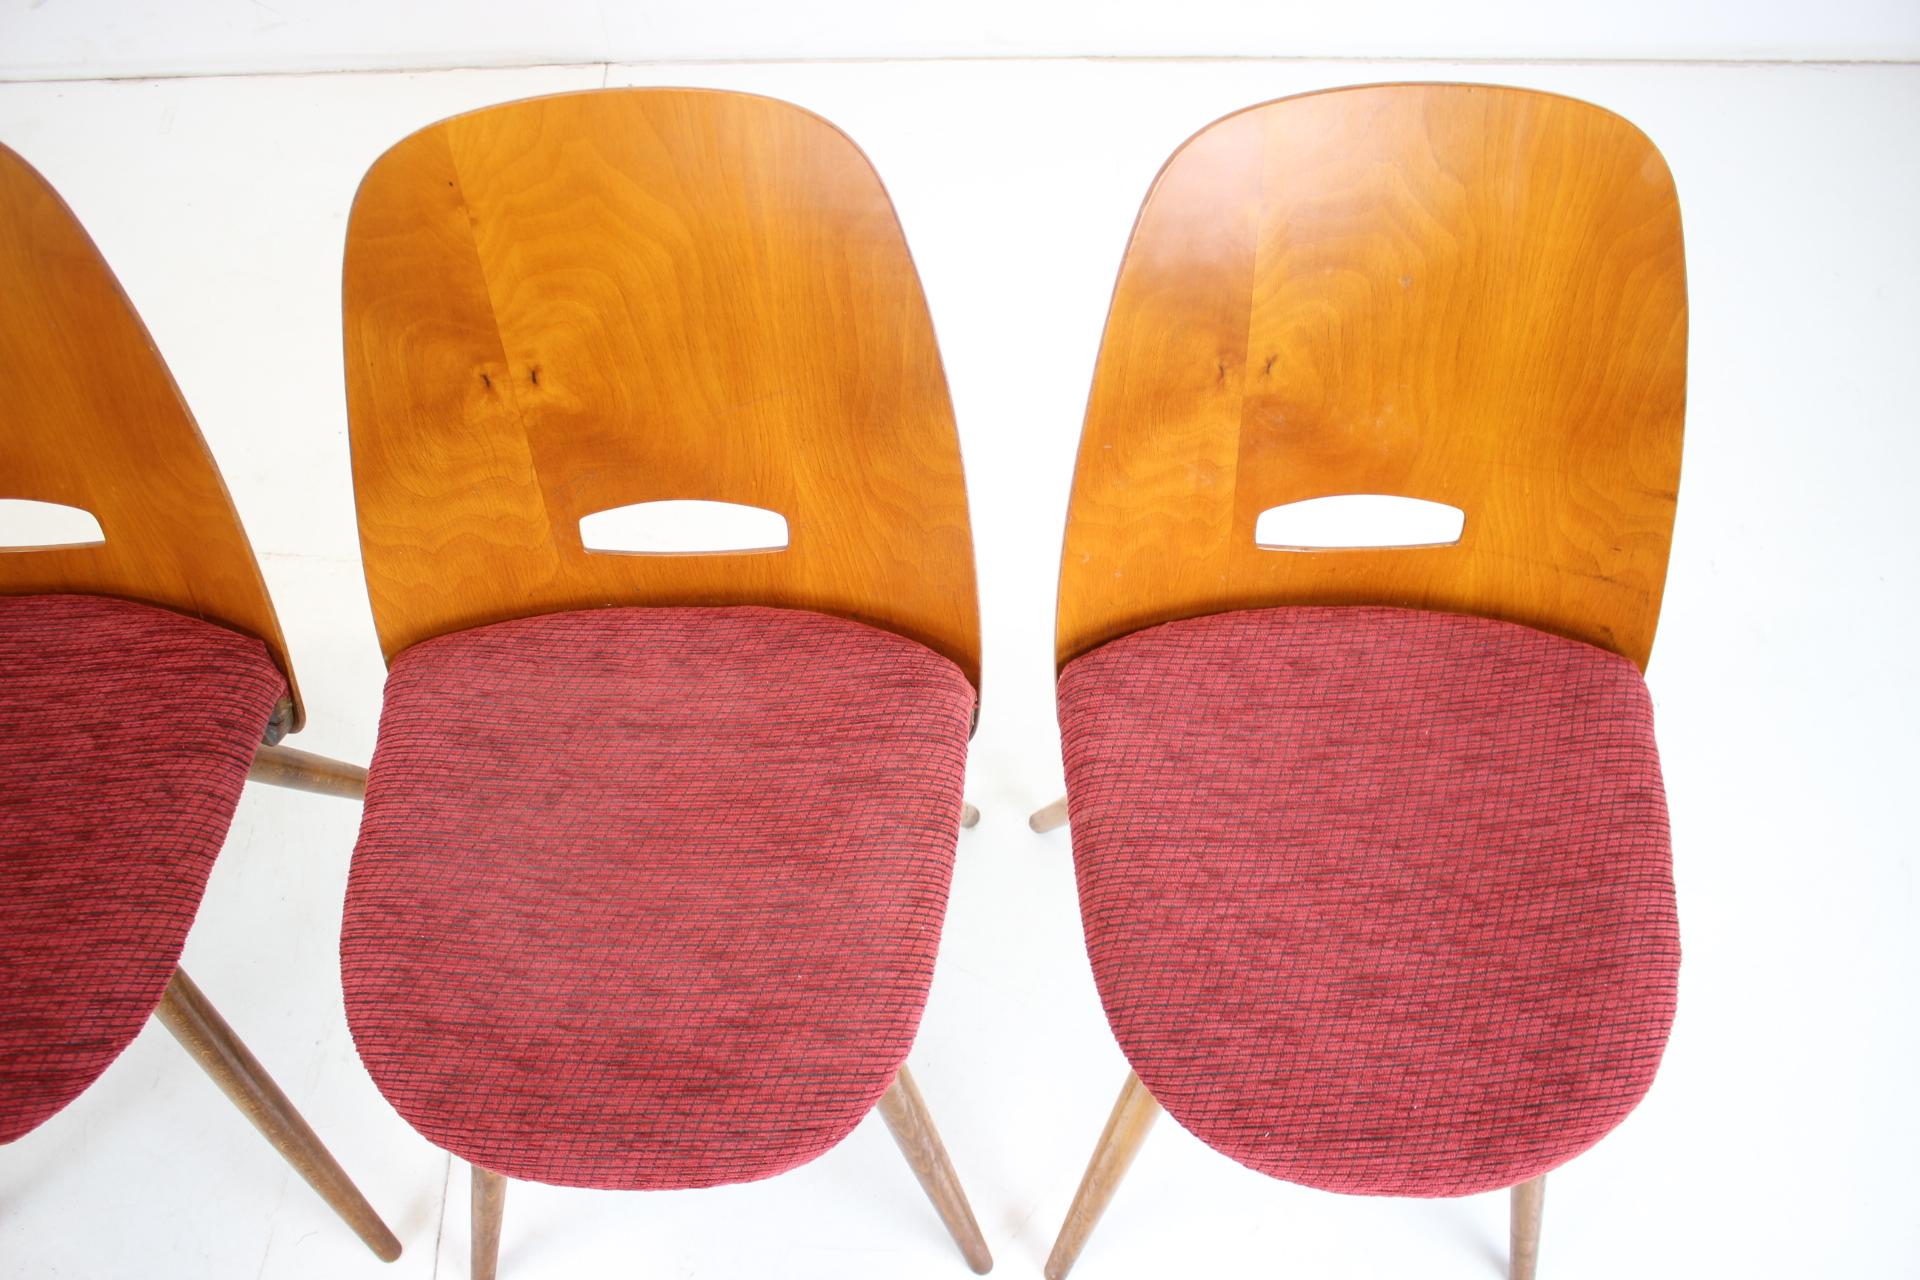 Czech 1960s Dining Chairs by Frantisek Jirak for Tatra, Set of 4 For Sale